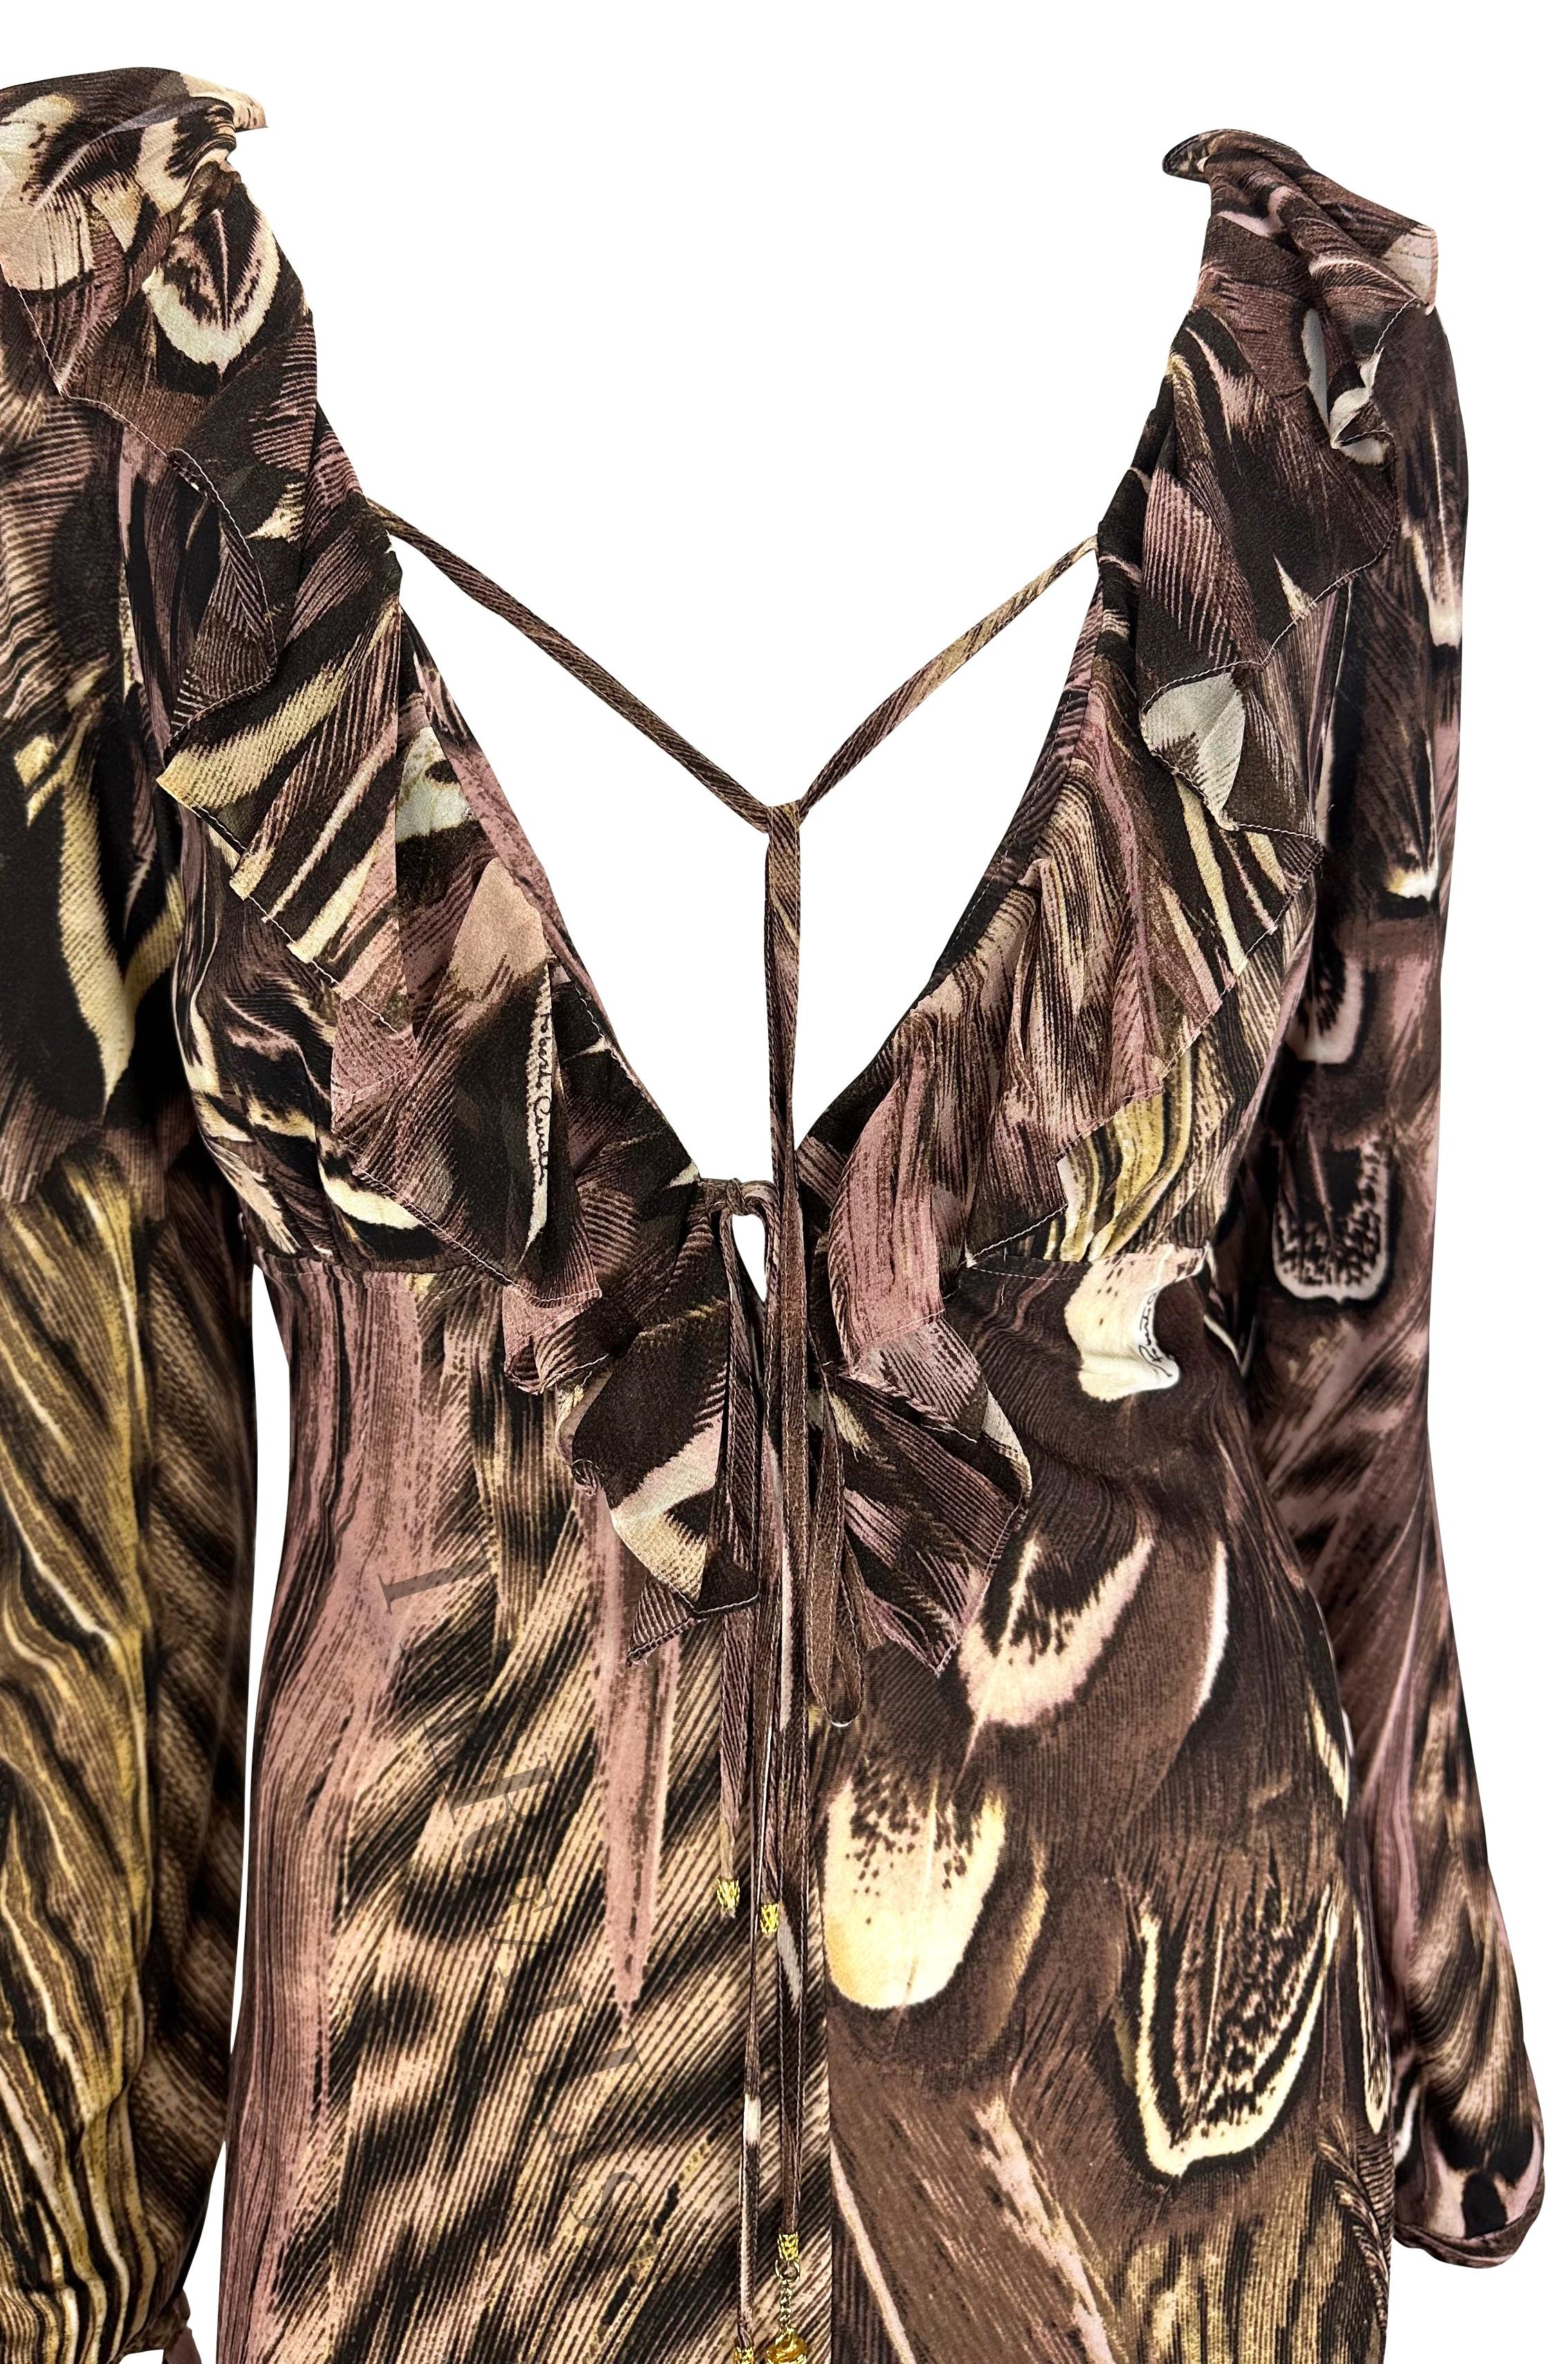 Presenting a fabulous feather print Roberto Cavalli dress. From Spring/Summer 2005, this dress is covered in a bold pink and brown feather print and features a large v-neckline, ruffles around the neckline, and laces at the bust and